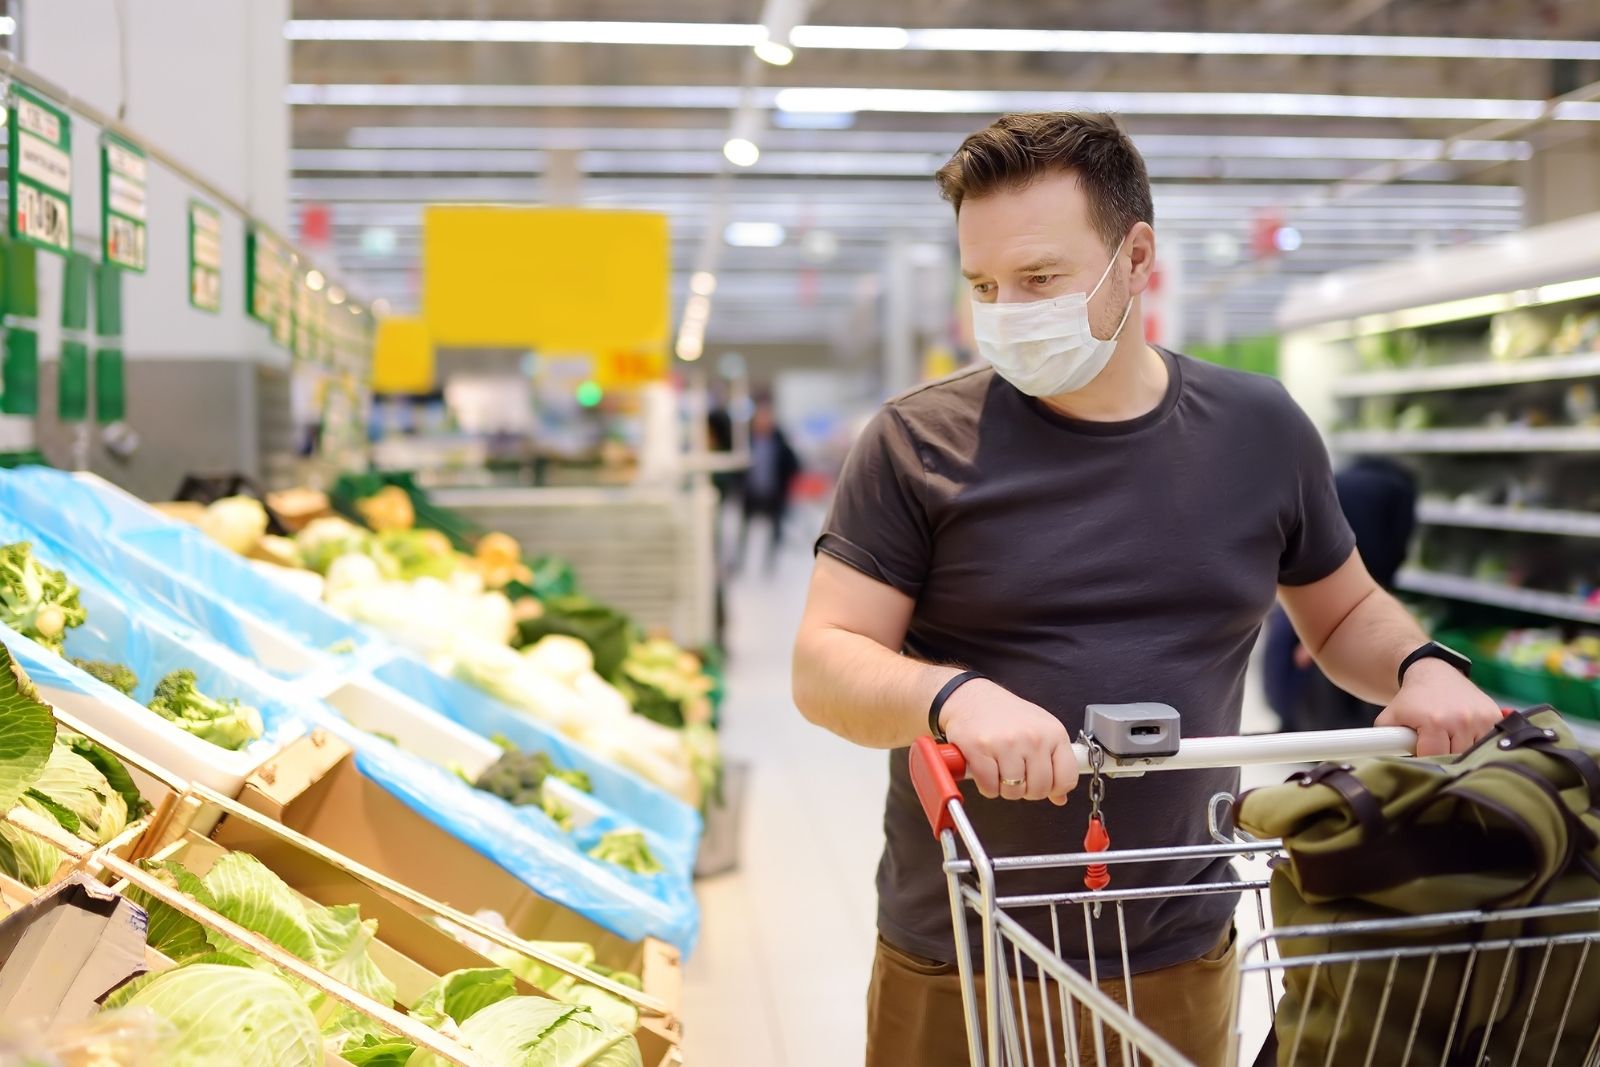 Man wearing COVID mask while shopping in supermarket